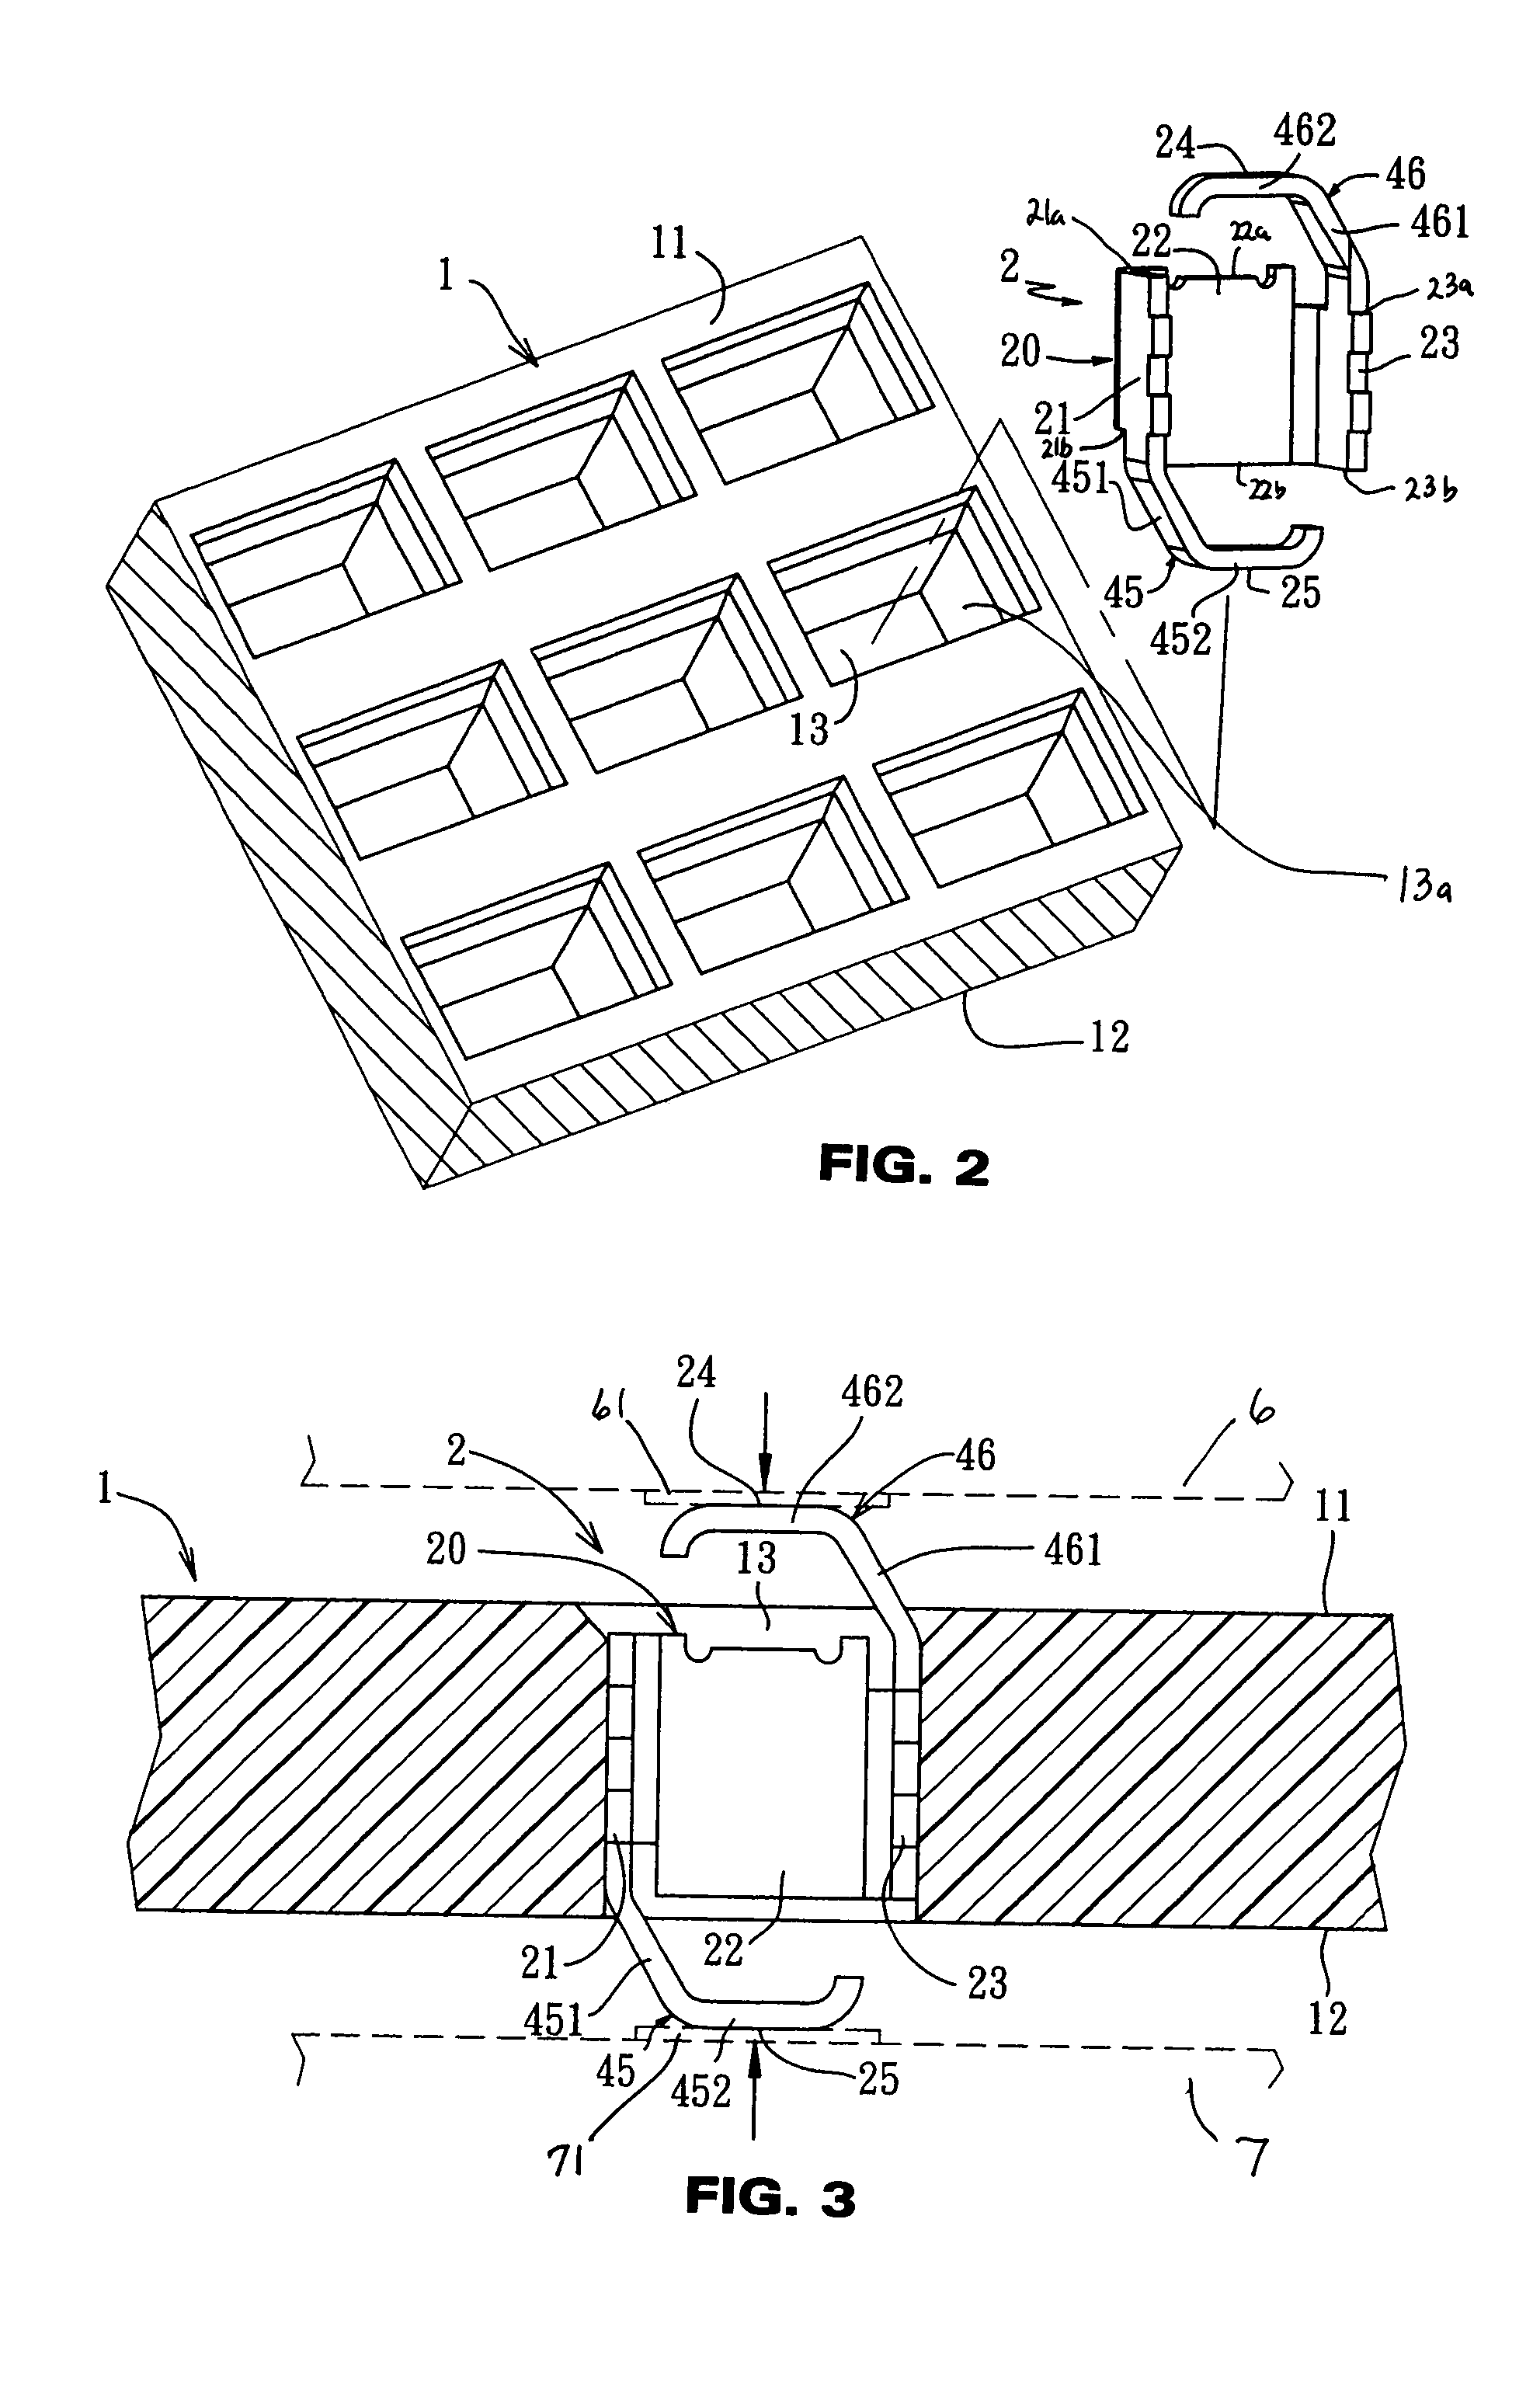 Conductive terminal and electrical connector applying the conductive terminal